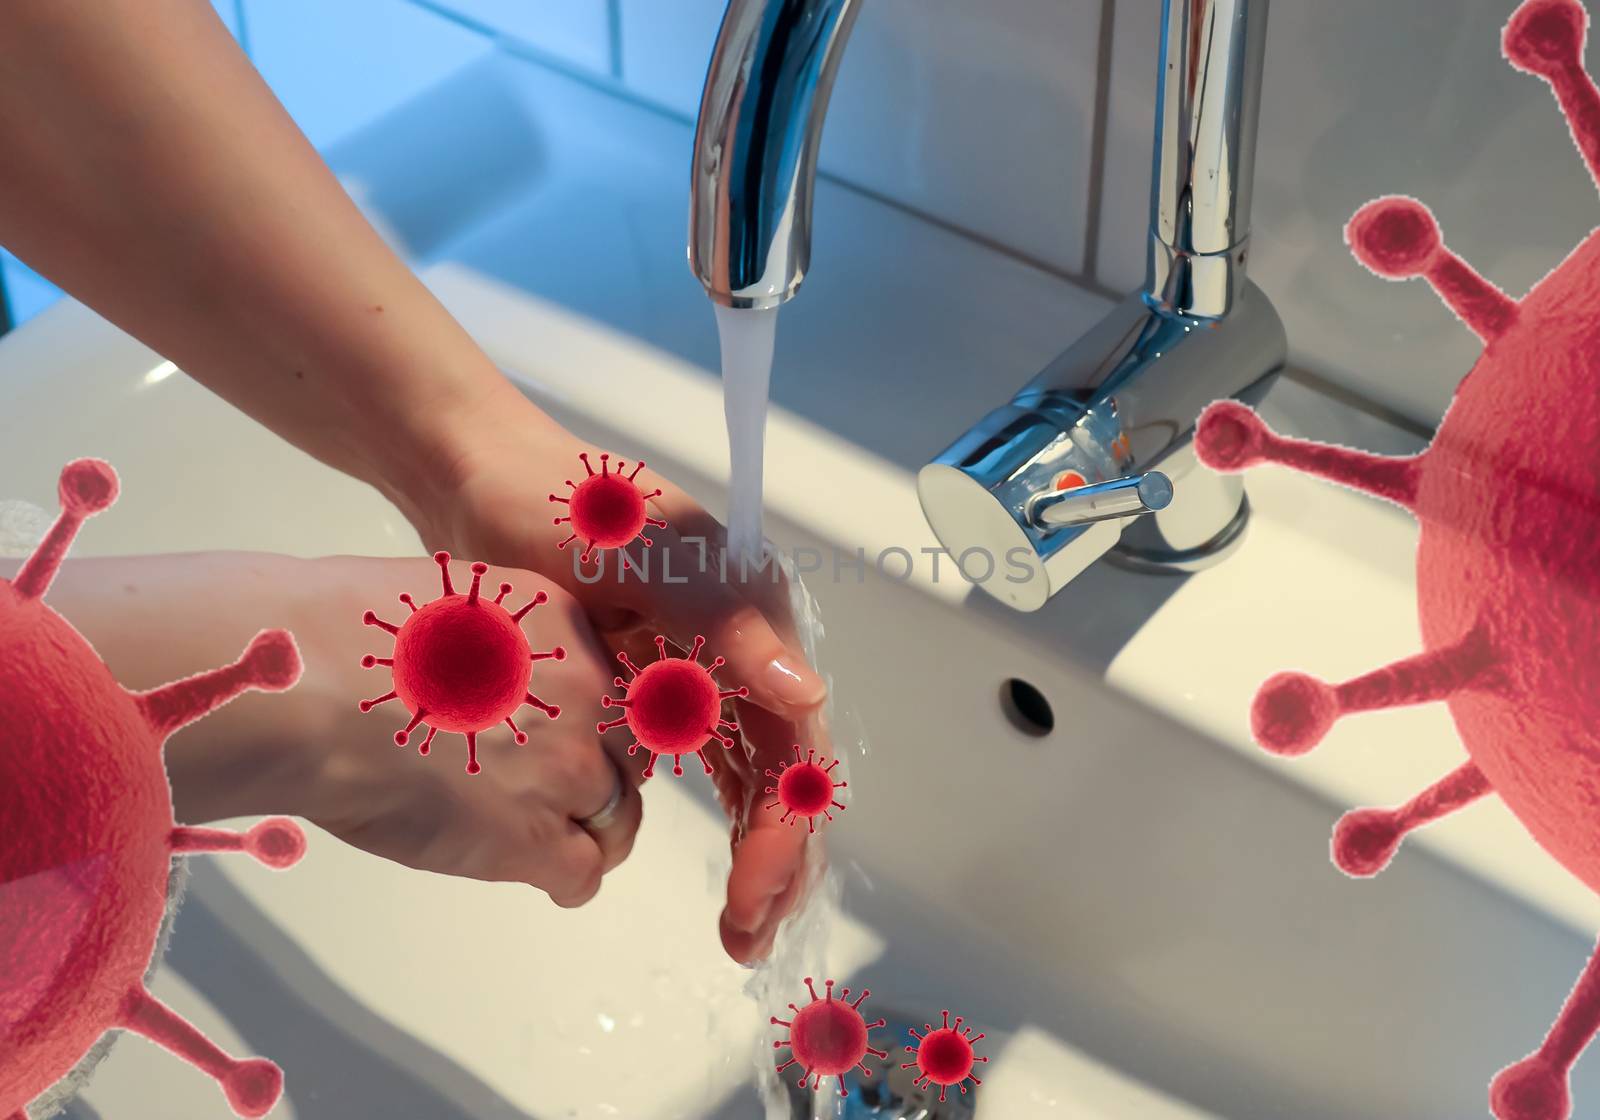 Cleaning and washing hands with soap prevention for outbreak of coronavirus covid-19